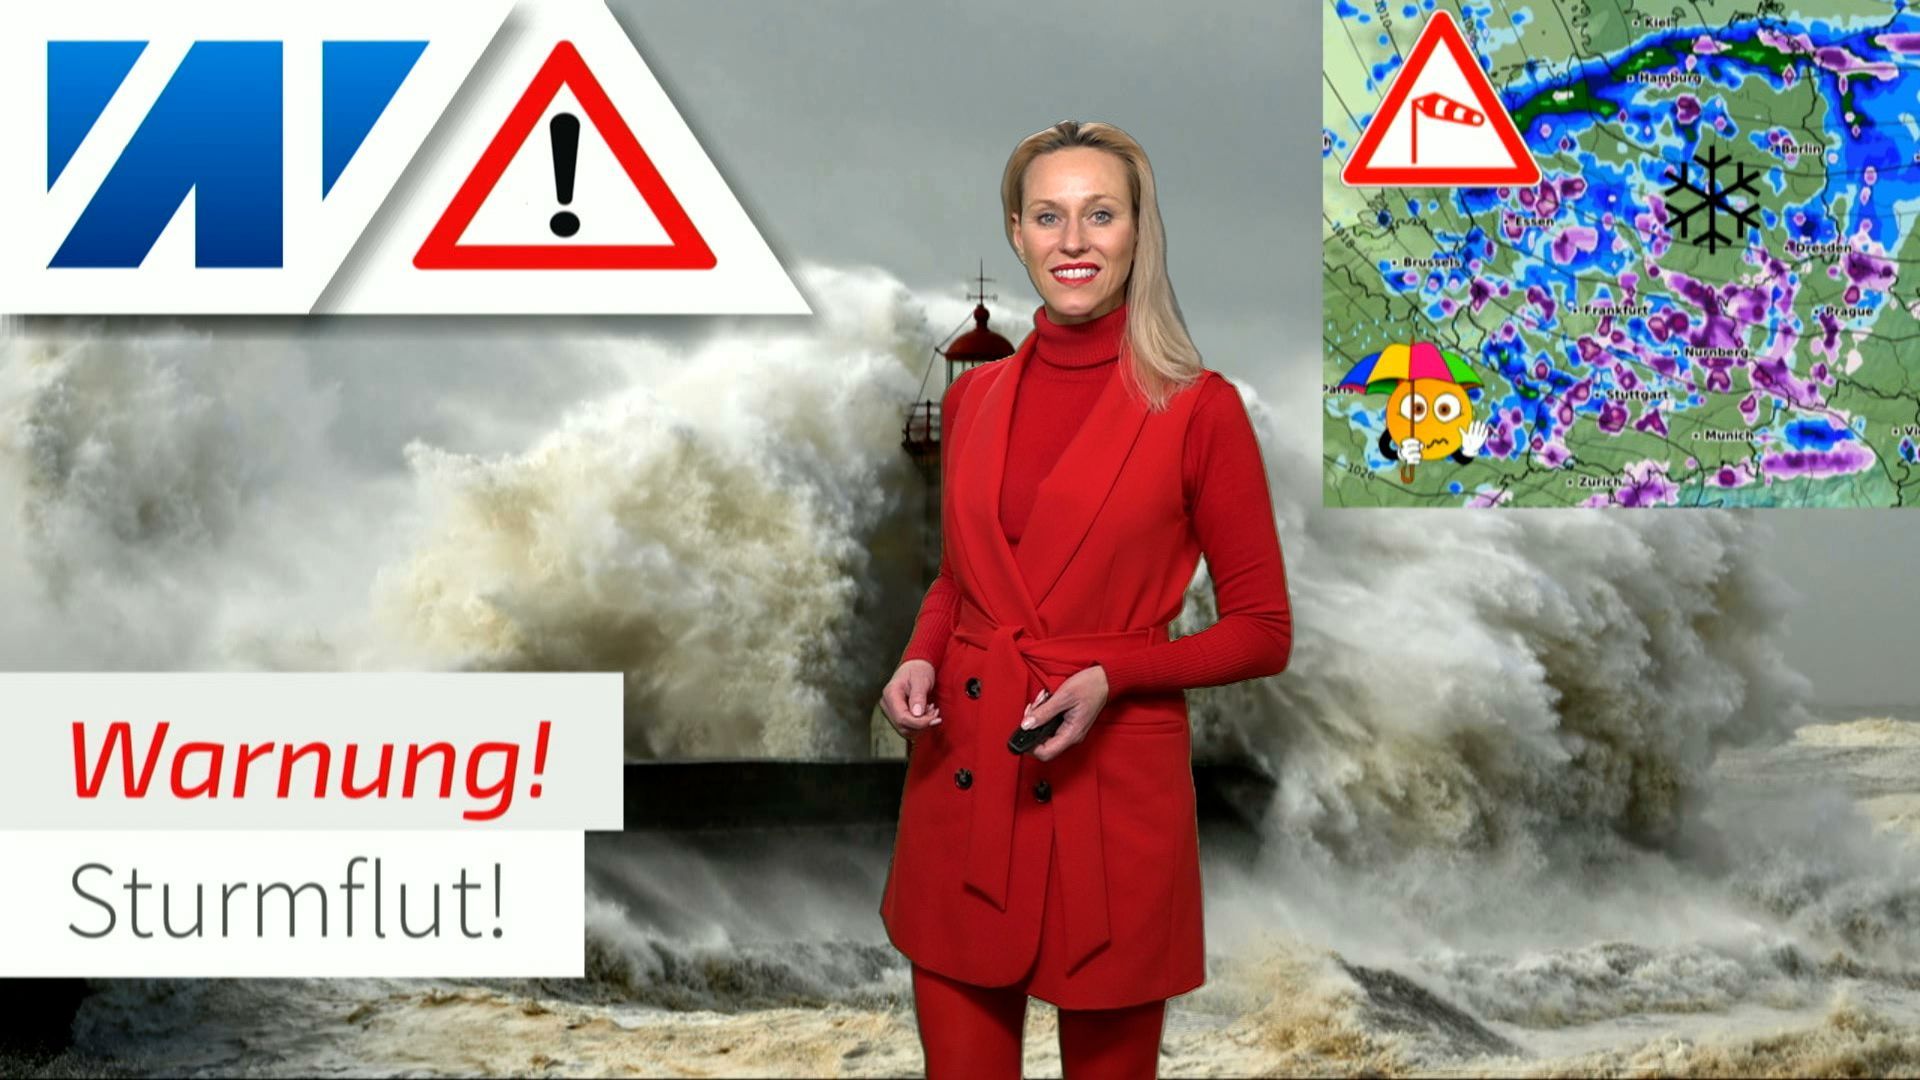 Storm over Germany: gale-force winds and storm surge danger on the coasts. It's getting wet!